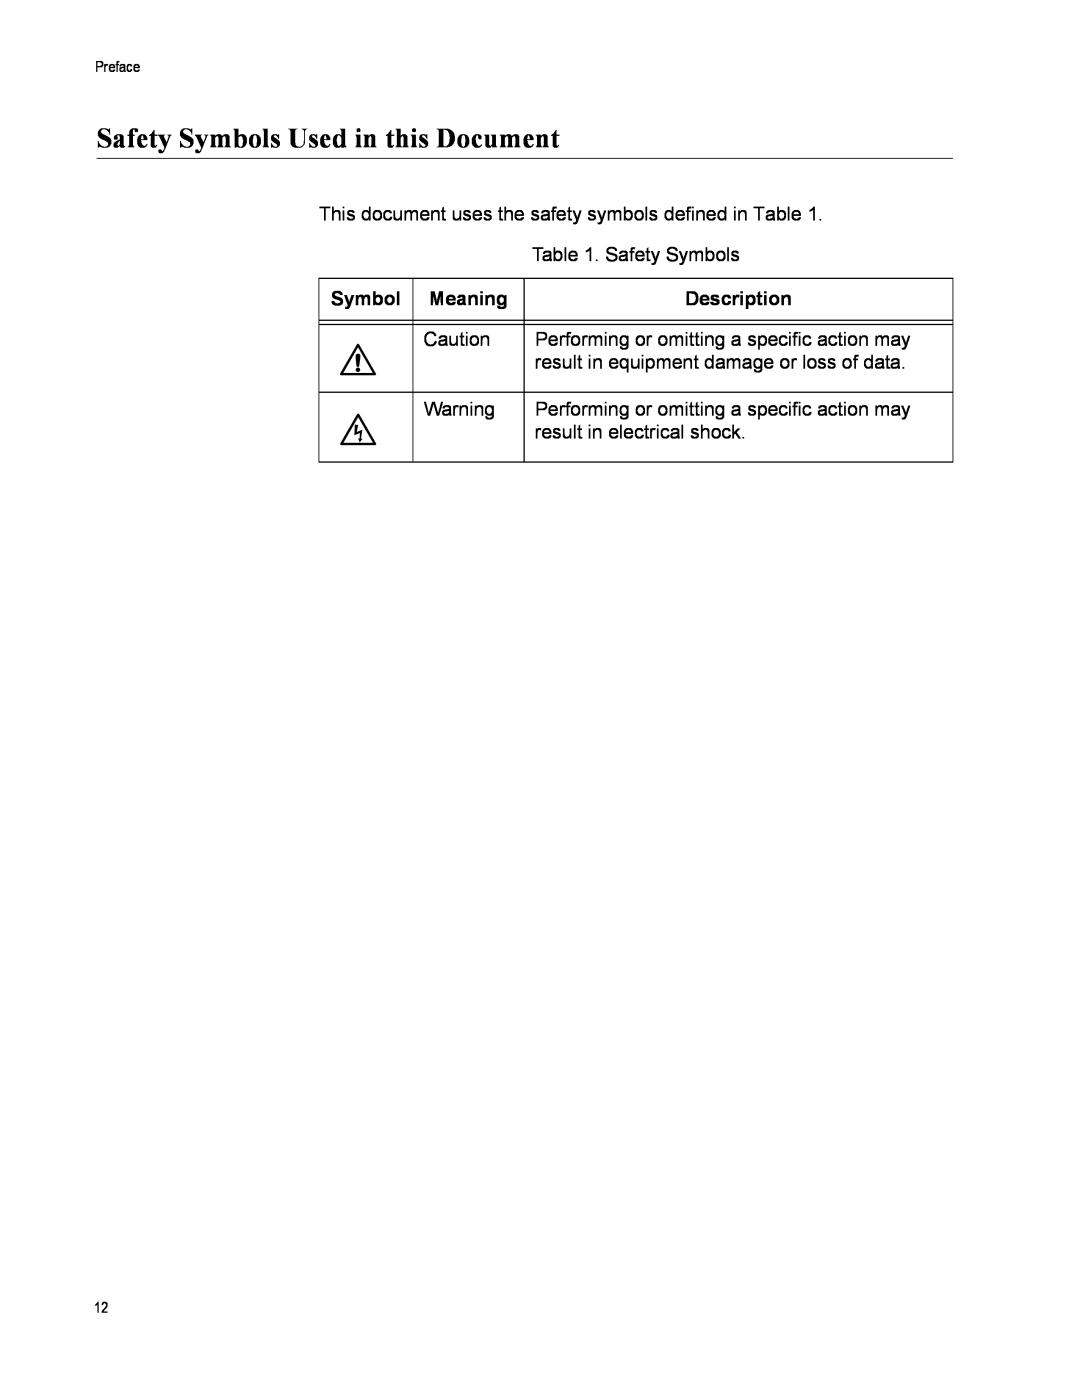 Allied Telesis GS900/8POE manual Safety Symbols Used in this Document, Meaning, Description 